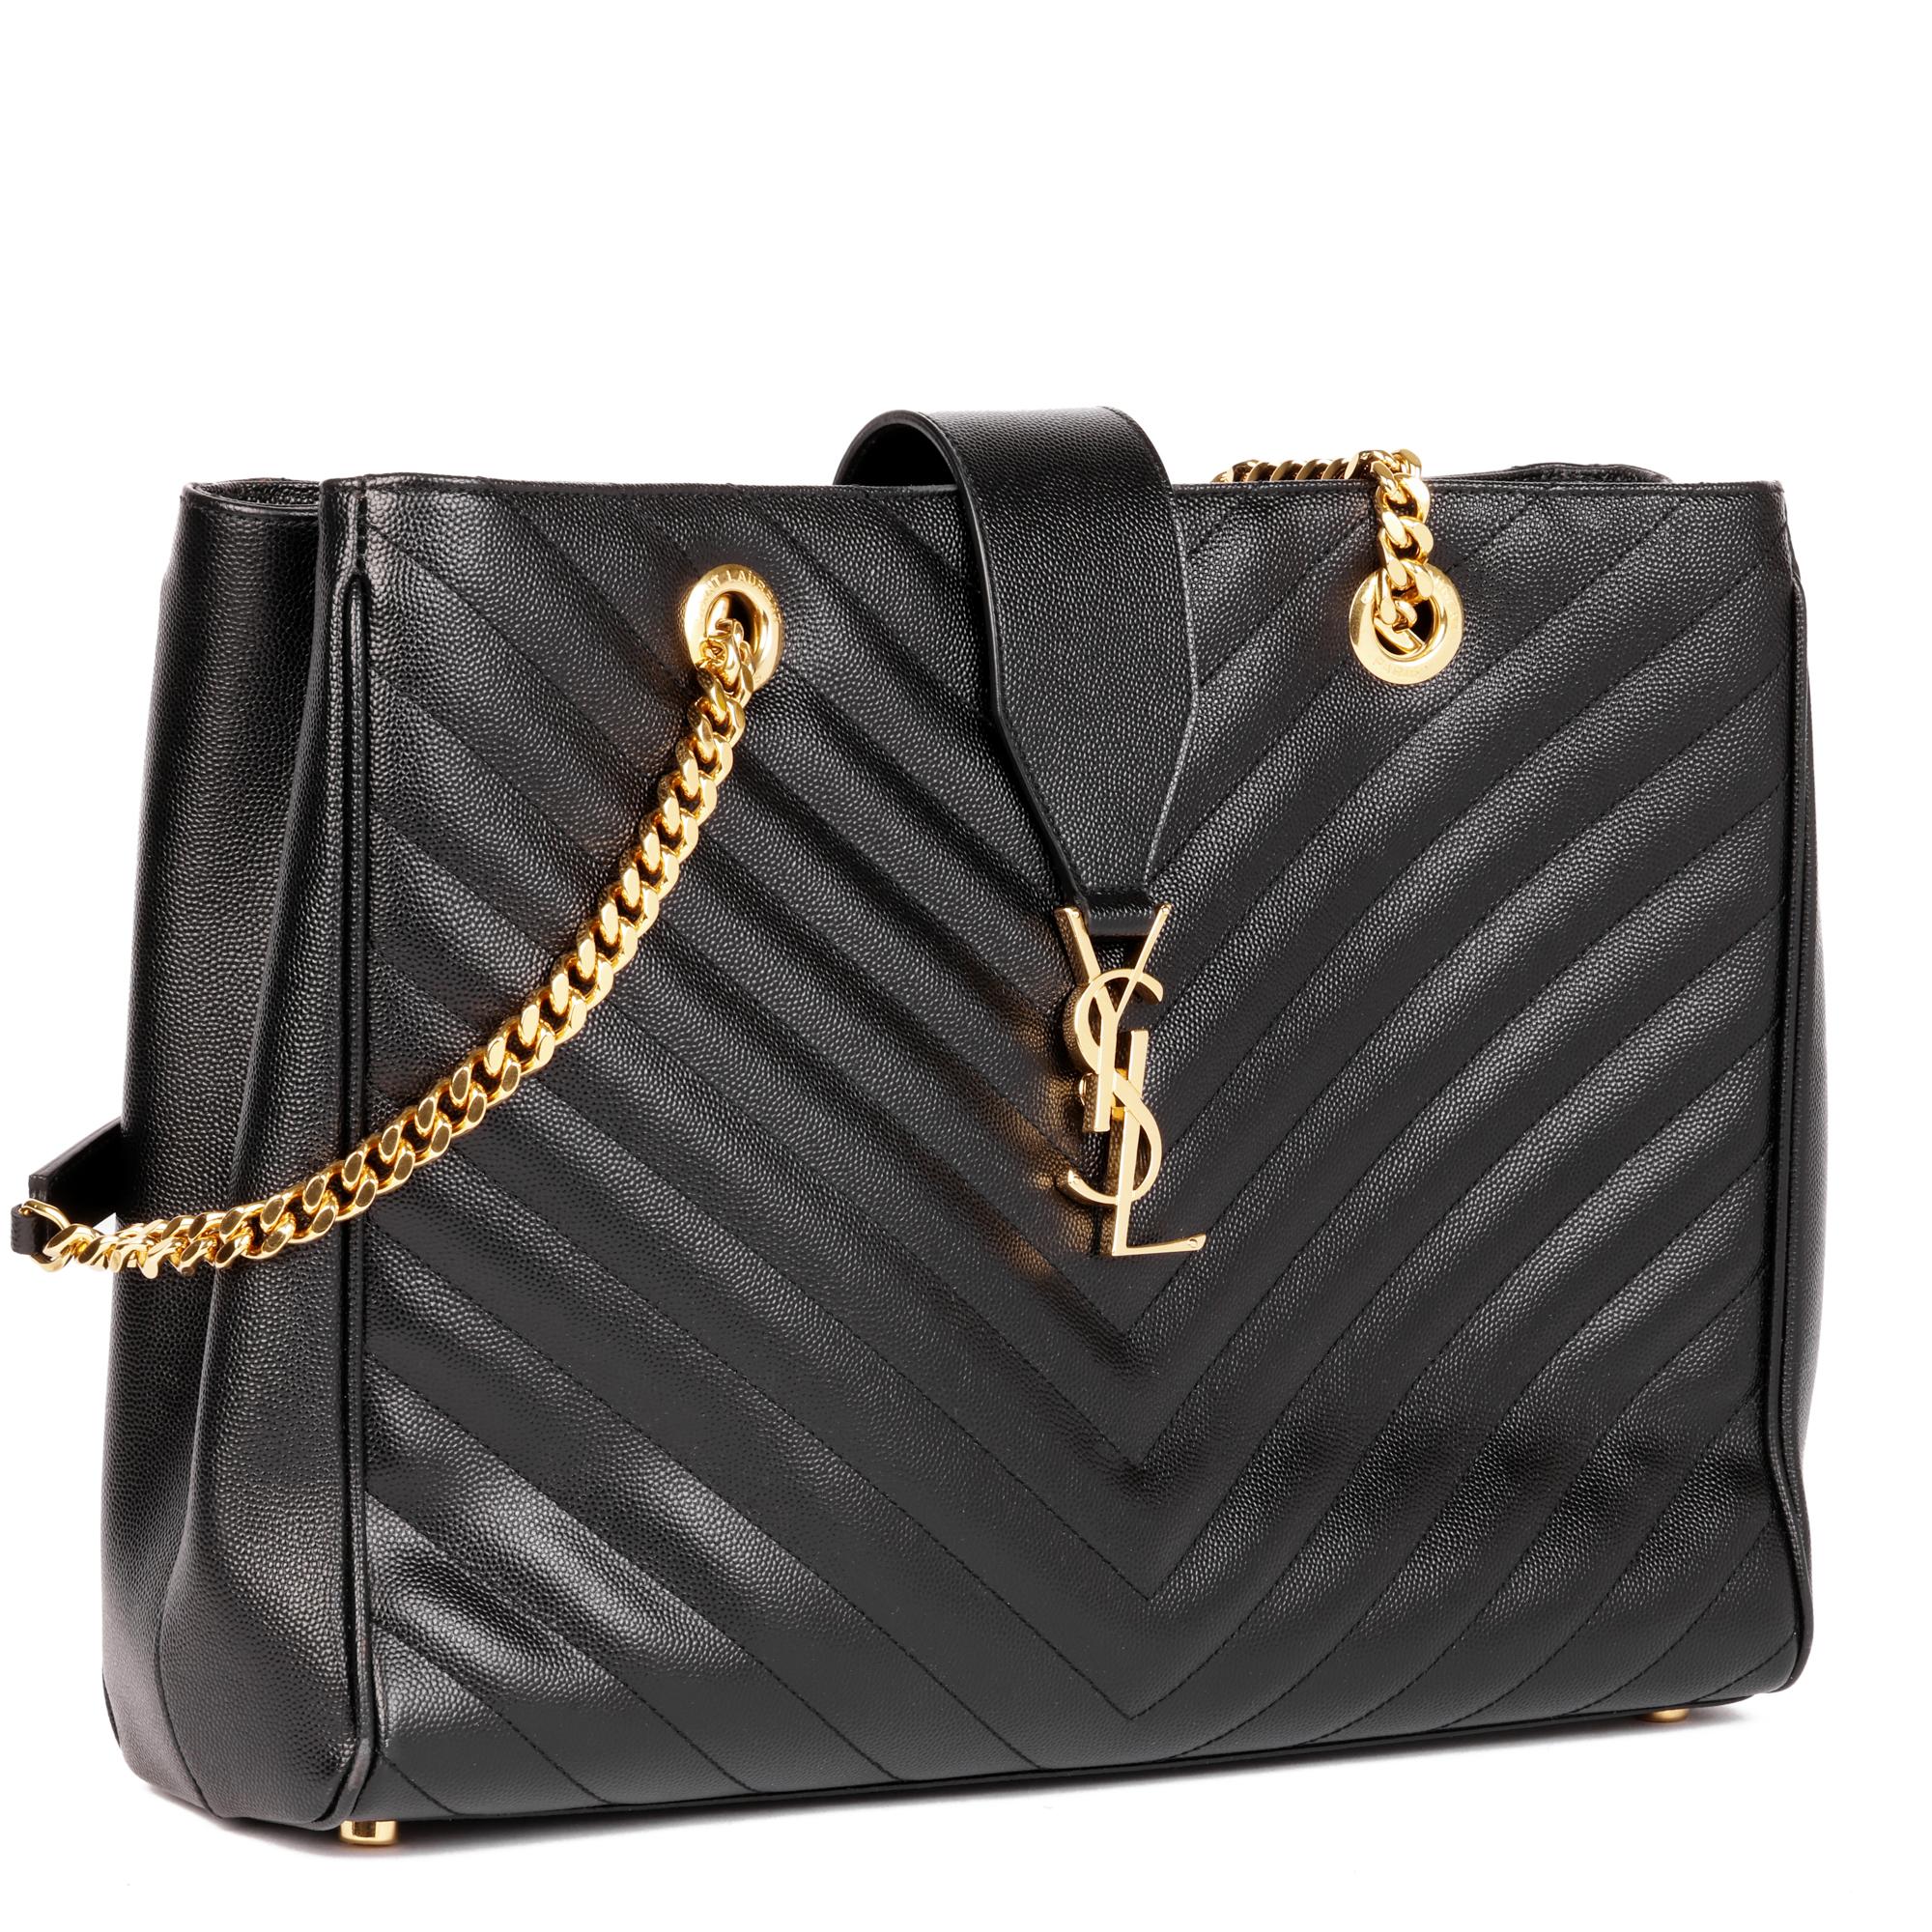 SAINT LAURENT
 Black Chevron Quilted Grained Calfskin Leather Shopping Bag

Xupes Reference: HB4902
Serial Number: PMR396911.0515
Age (Circa): 2020
Accompanied By: Leather Swatch, Authenticity Card
Authenticity Details: Date Stamp (Made in